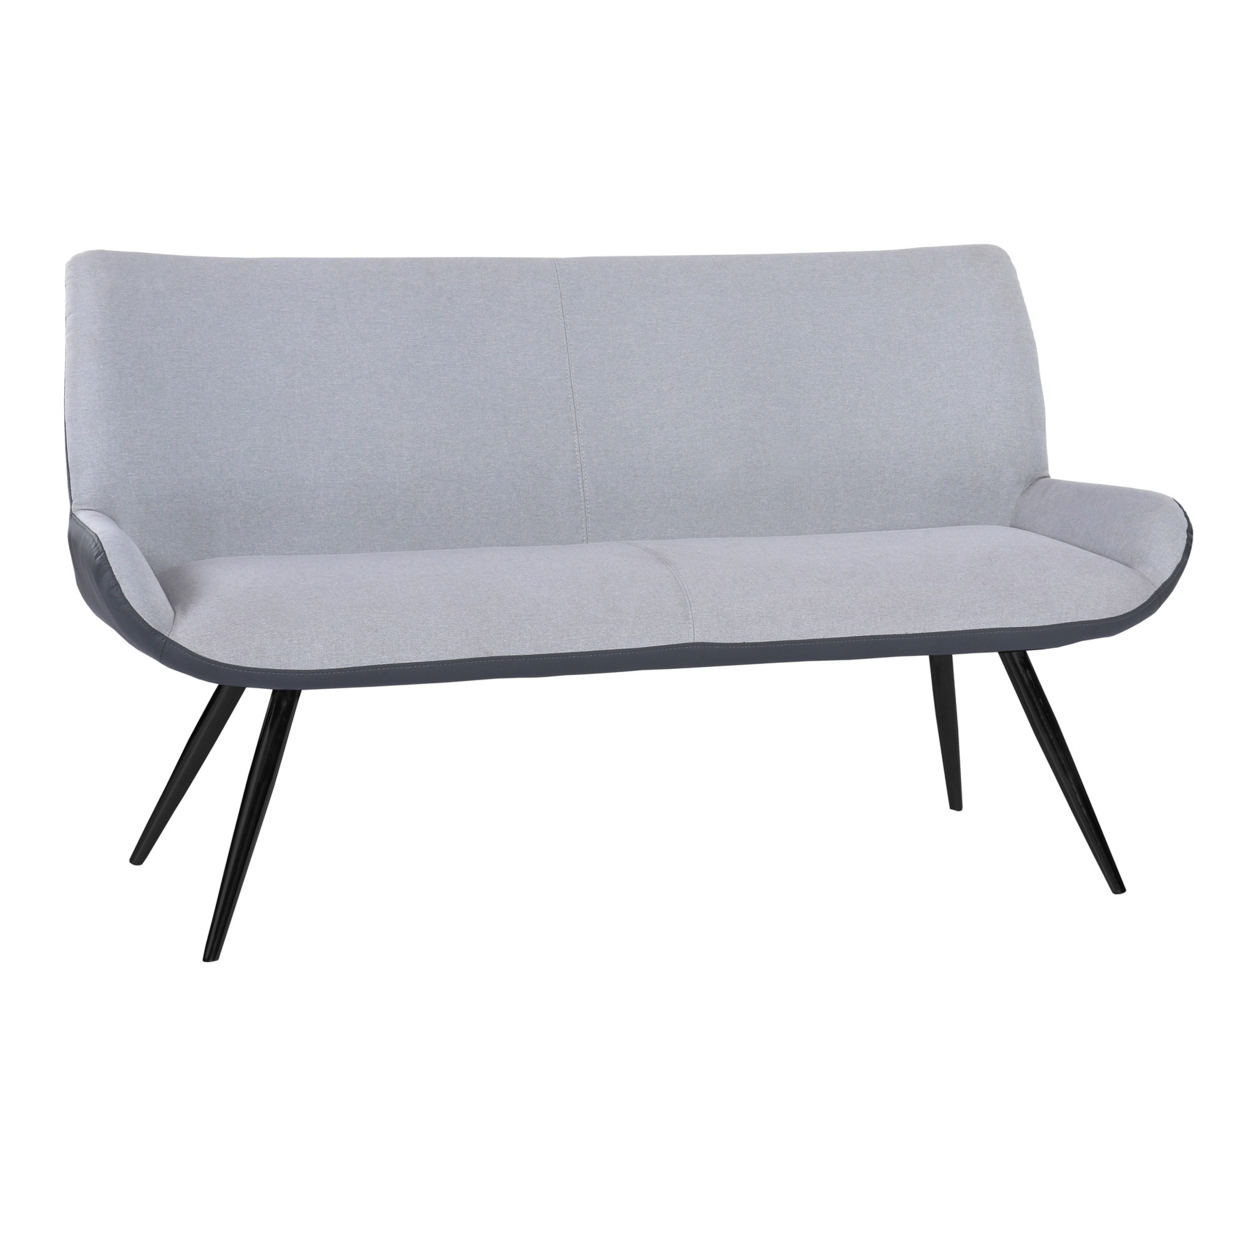 High Back Fabric Bench With Low Profile Arms And Tapered Legs, Gray- Saltoro Sherpi